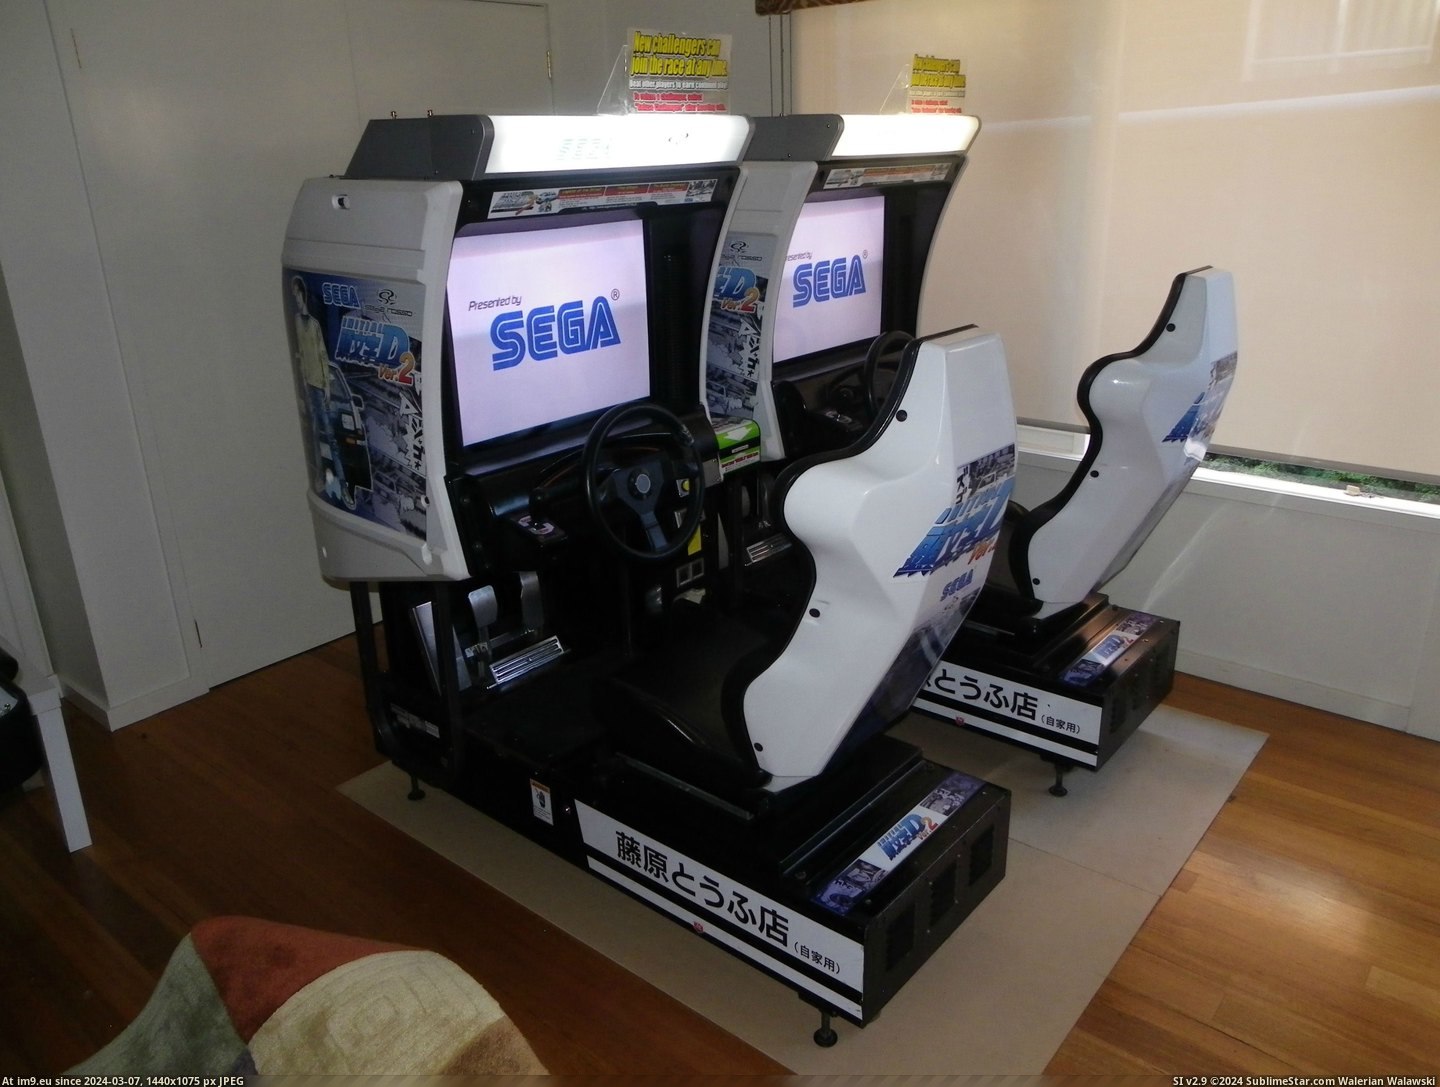 #Gaming #Two #Arcade #Fixing #Racer #Games #Finished [Gaming] Just finished fixing up two arcade racer games! 24 Pic. (Obraz z album My r/GAMING favs))